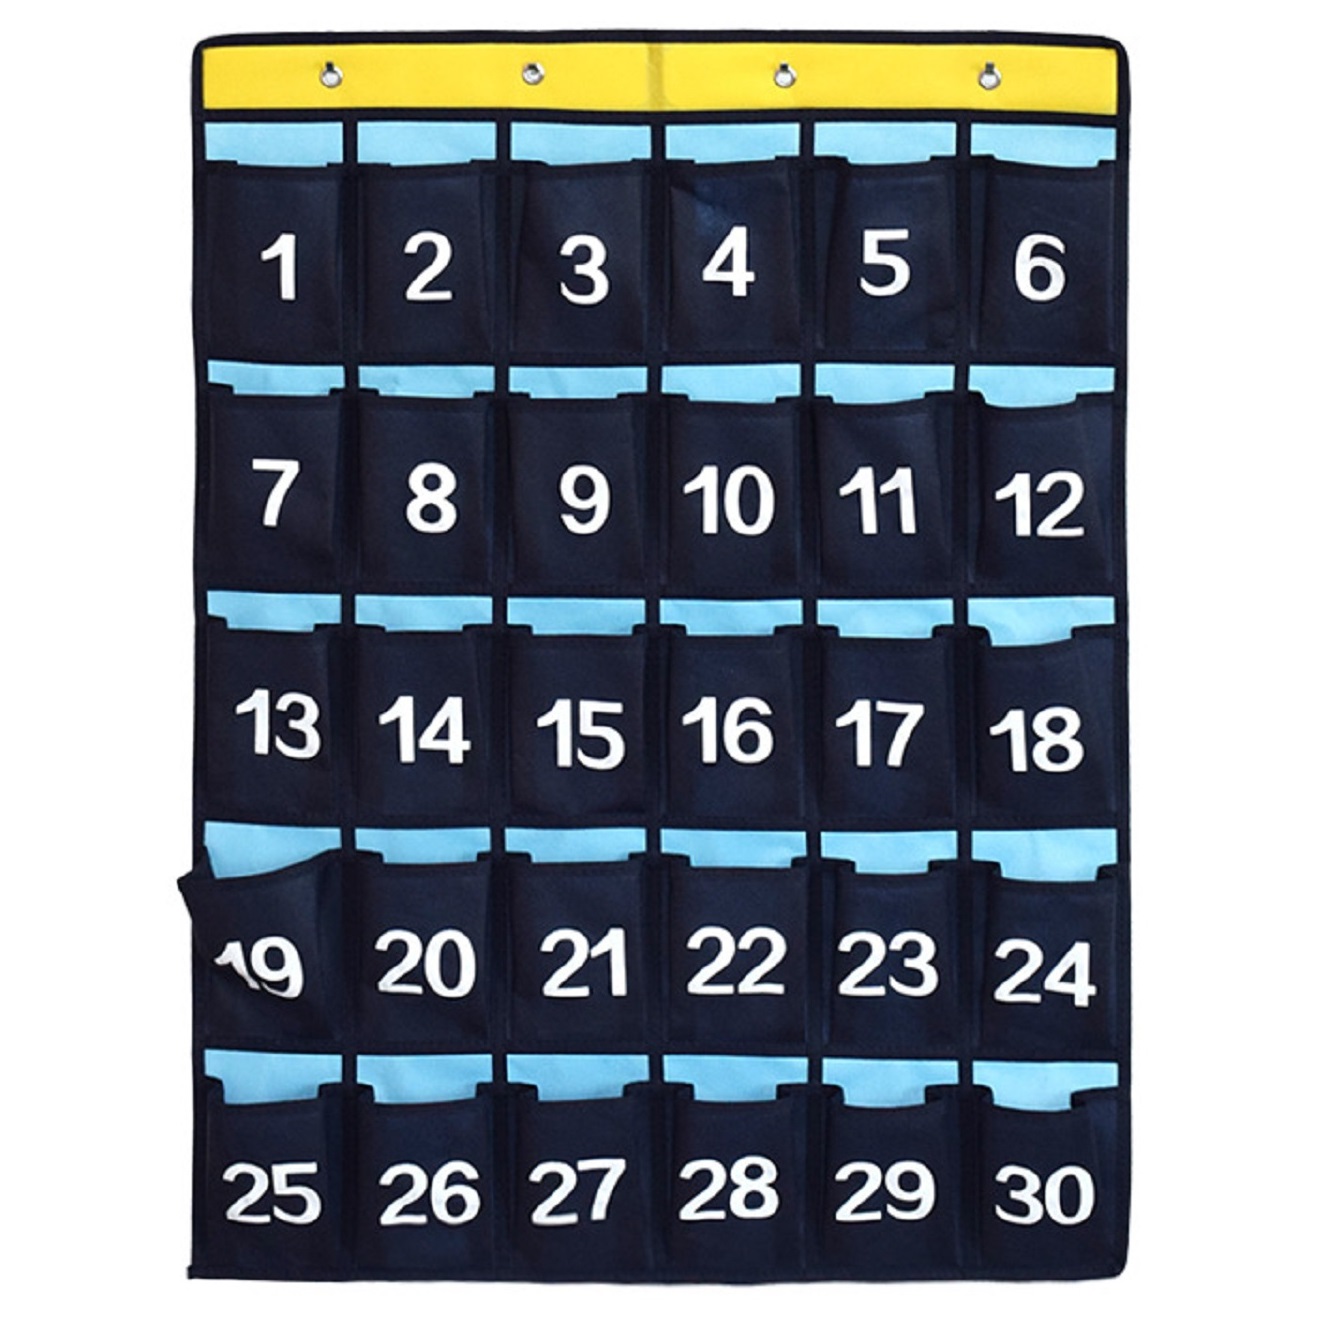 Xelparuc Classroom Pocket Chart Numbered, Cell Phones Holder Door Hanging Organizer for Calculators and All iPhones, Size: Large, Other